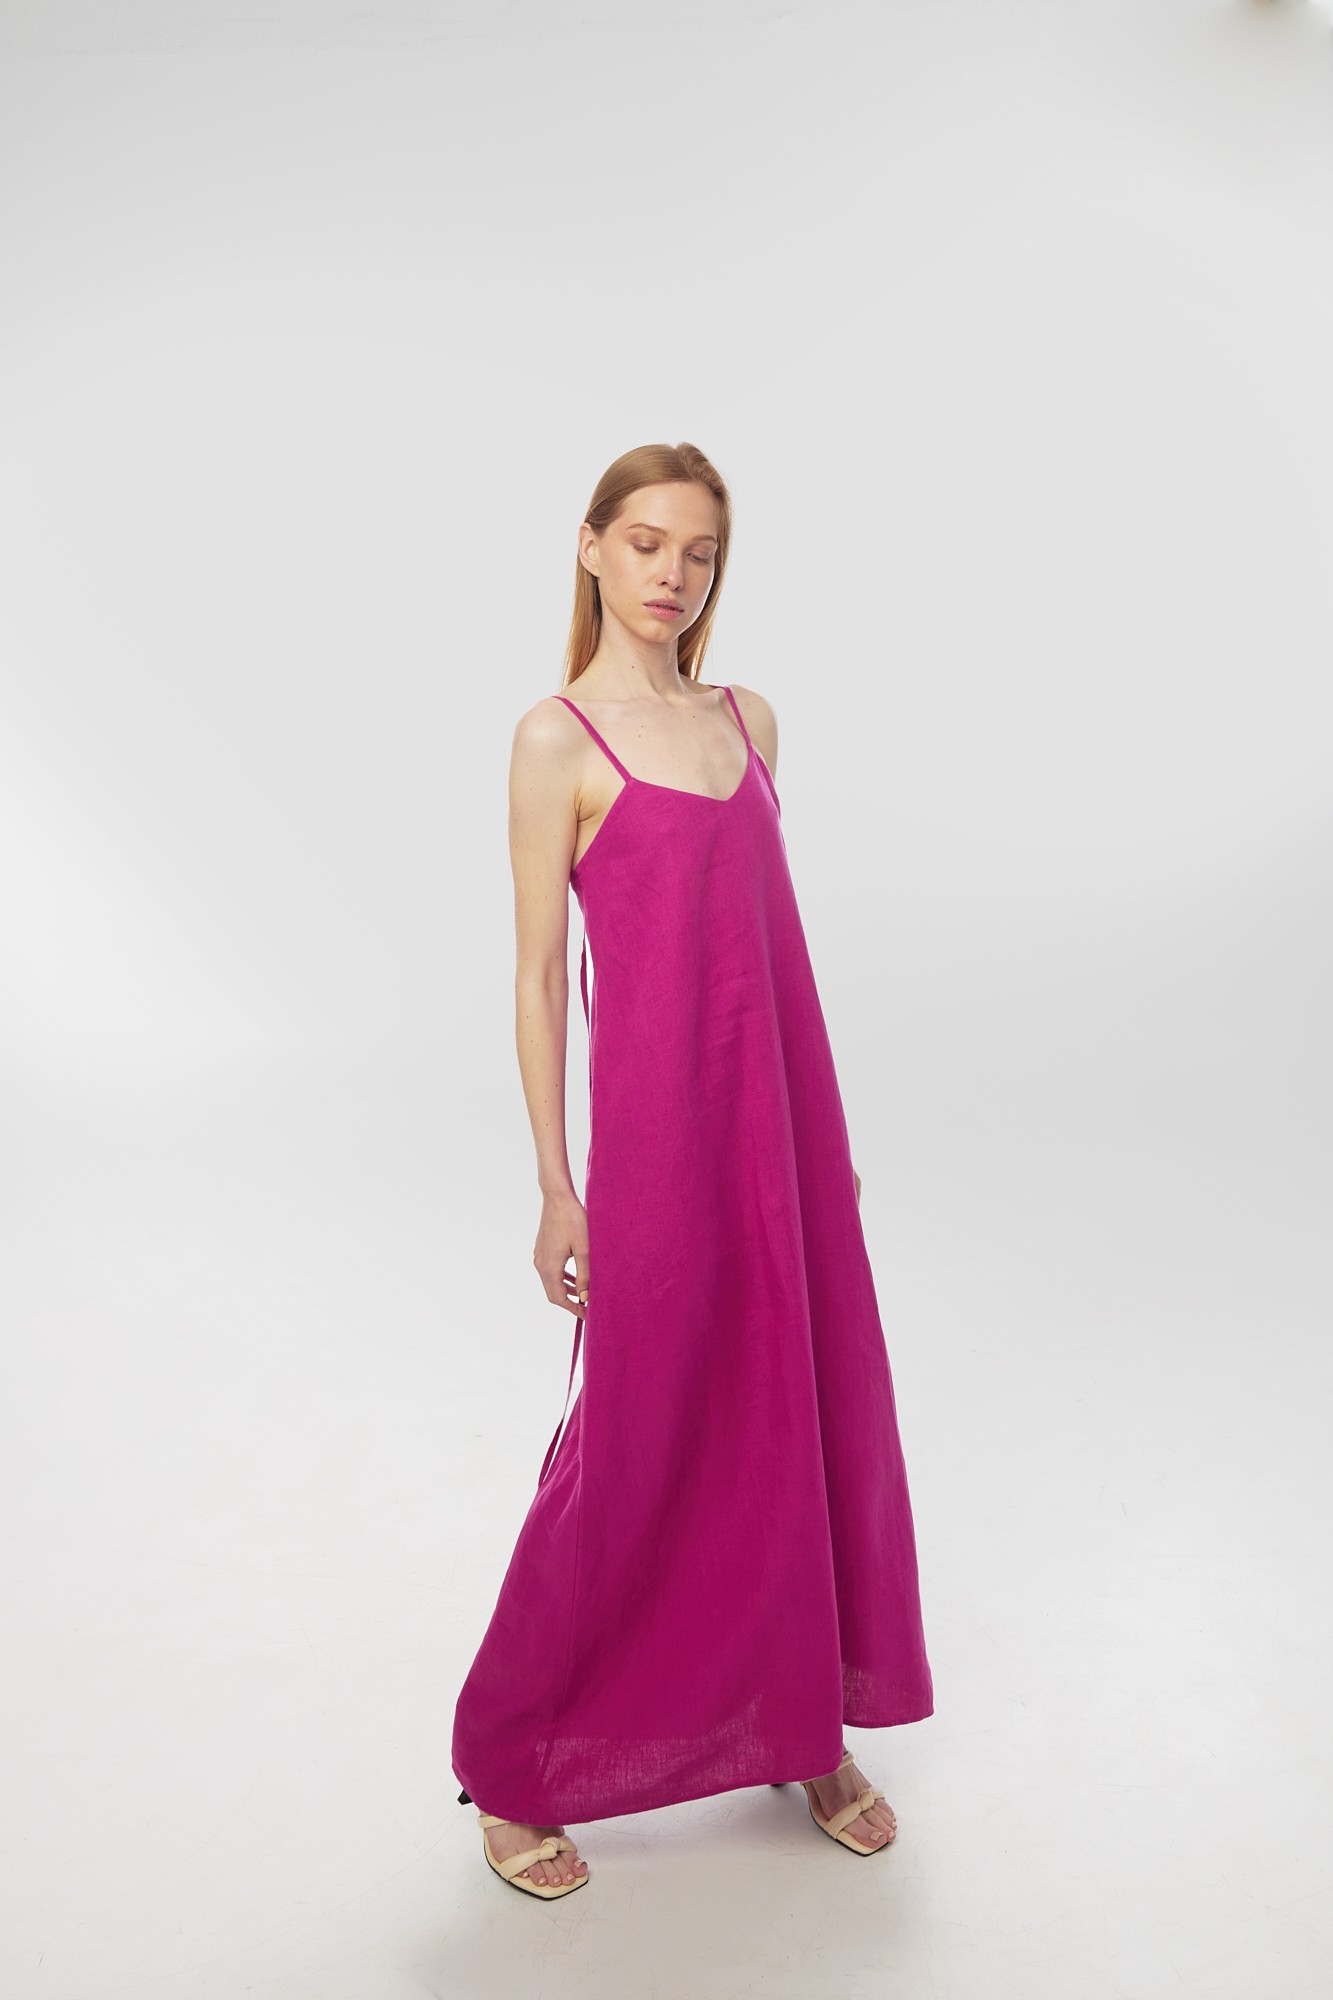 Linen sundress with long straps and raw back seam. Fuchsia color. Kvit Collection